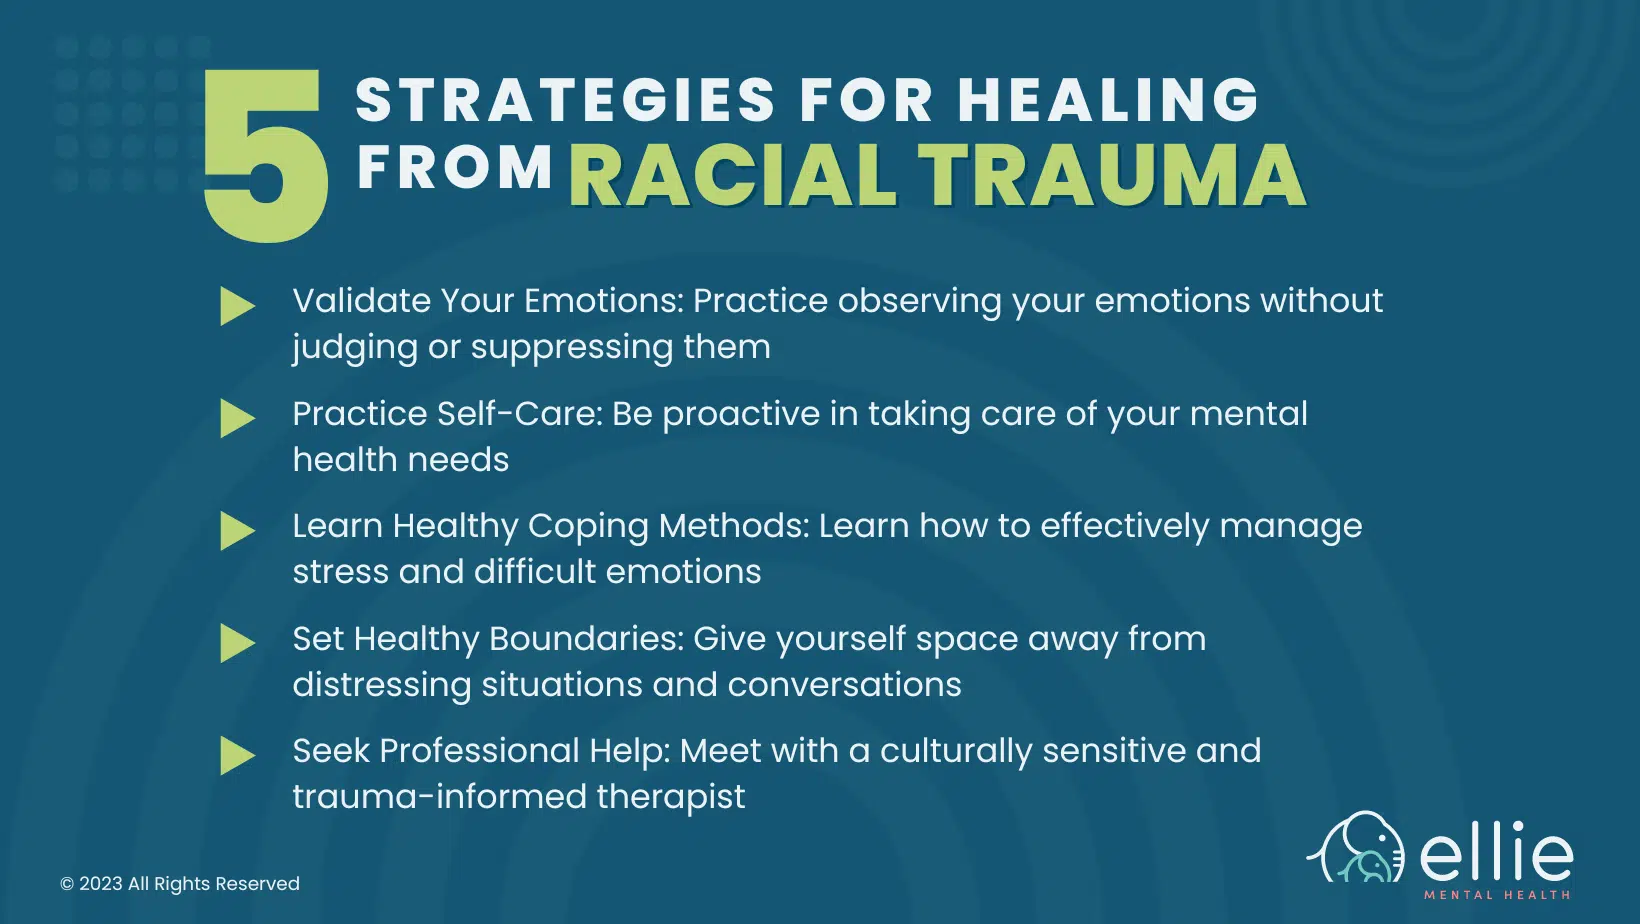 5 strategies for healing from racial trauma infographic